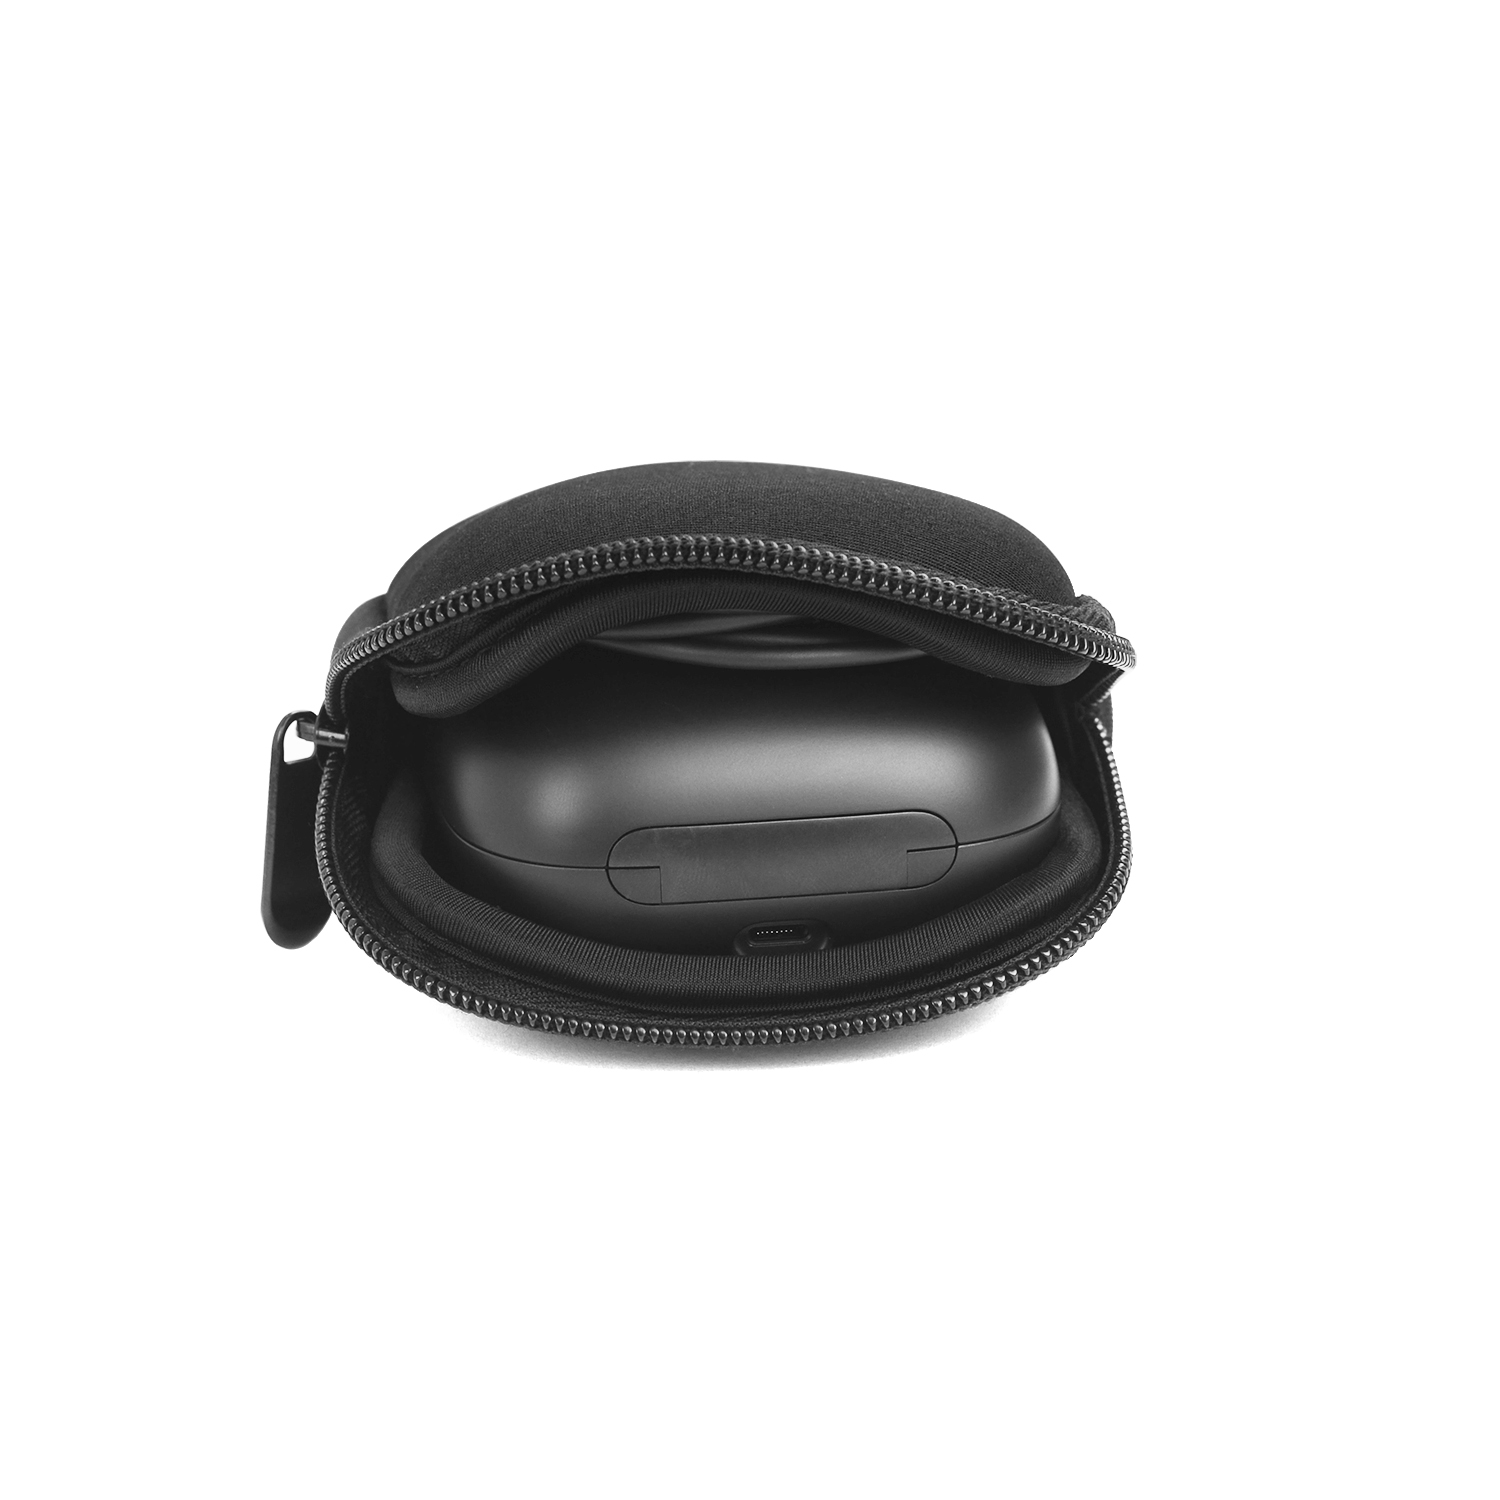 Bakeey-Earphone-Storage-Bag-Wireless-bluetooth-Headset-Protective-Carrying-Case-Dustproof-Portable-S-1800555-4